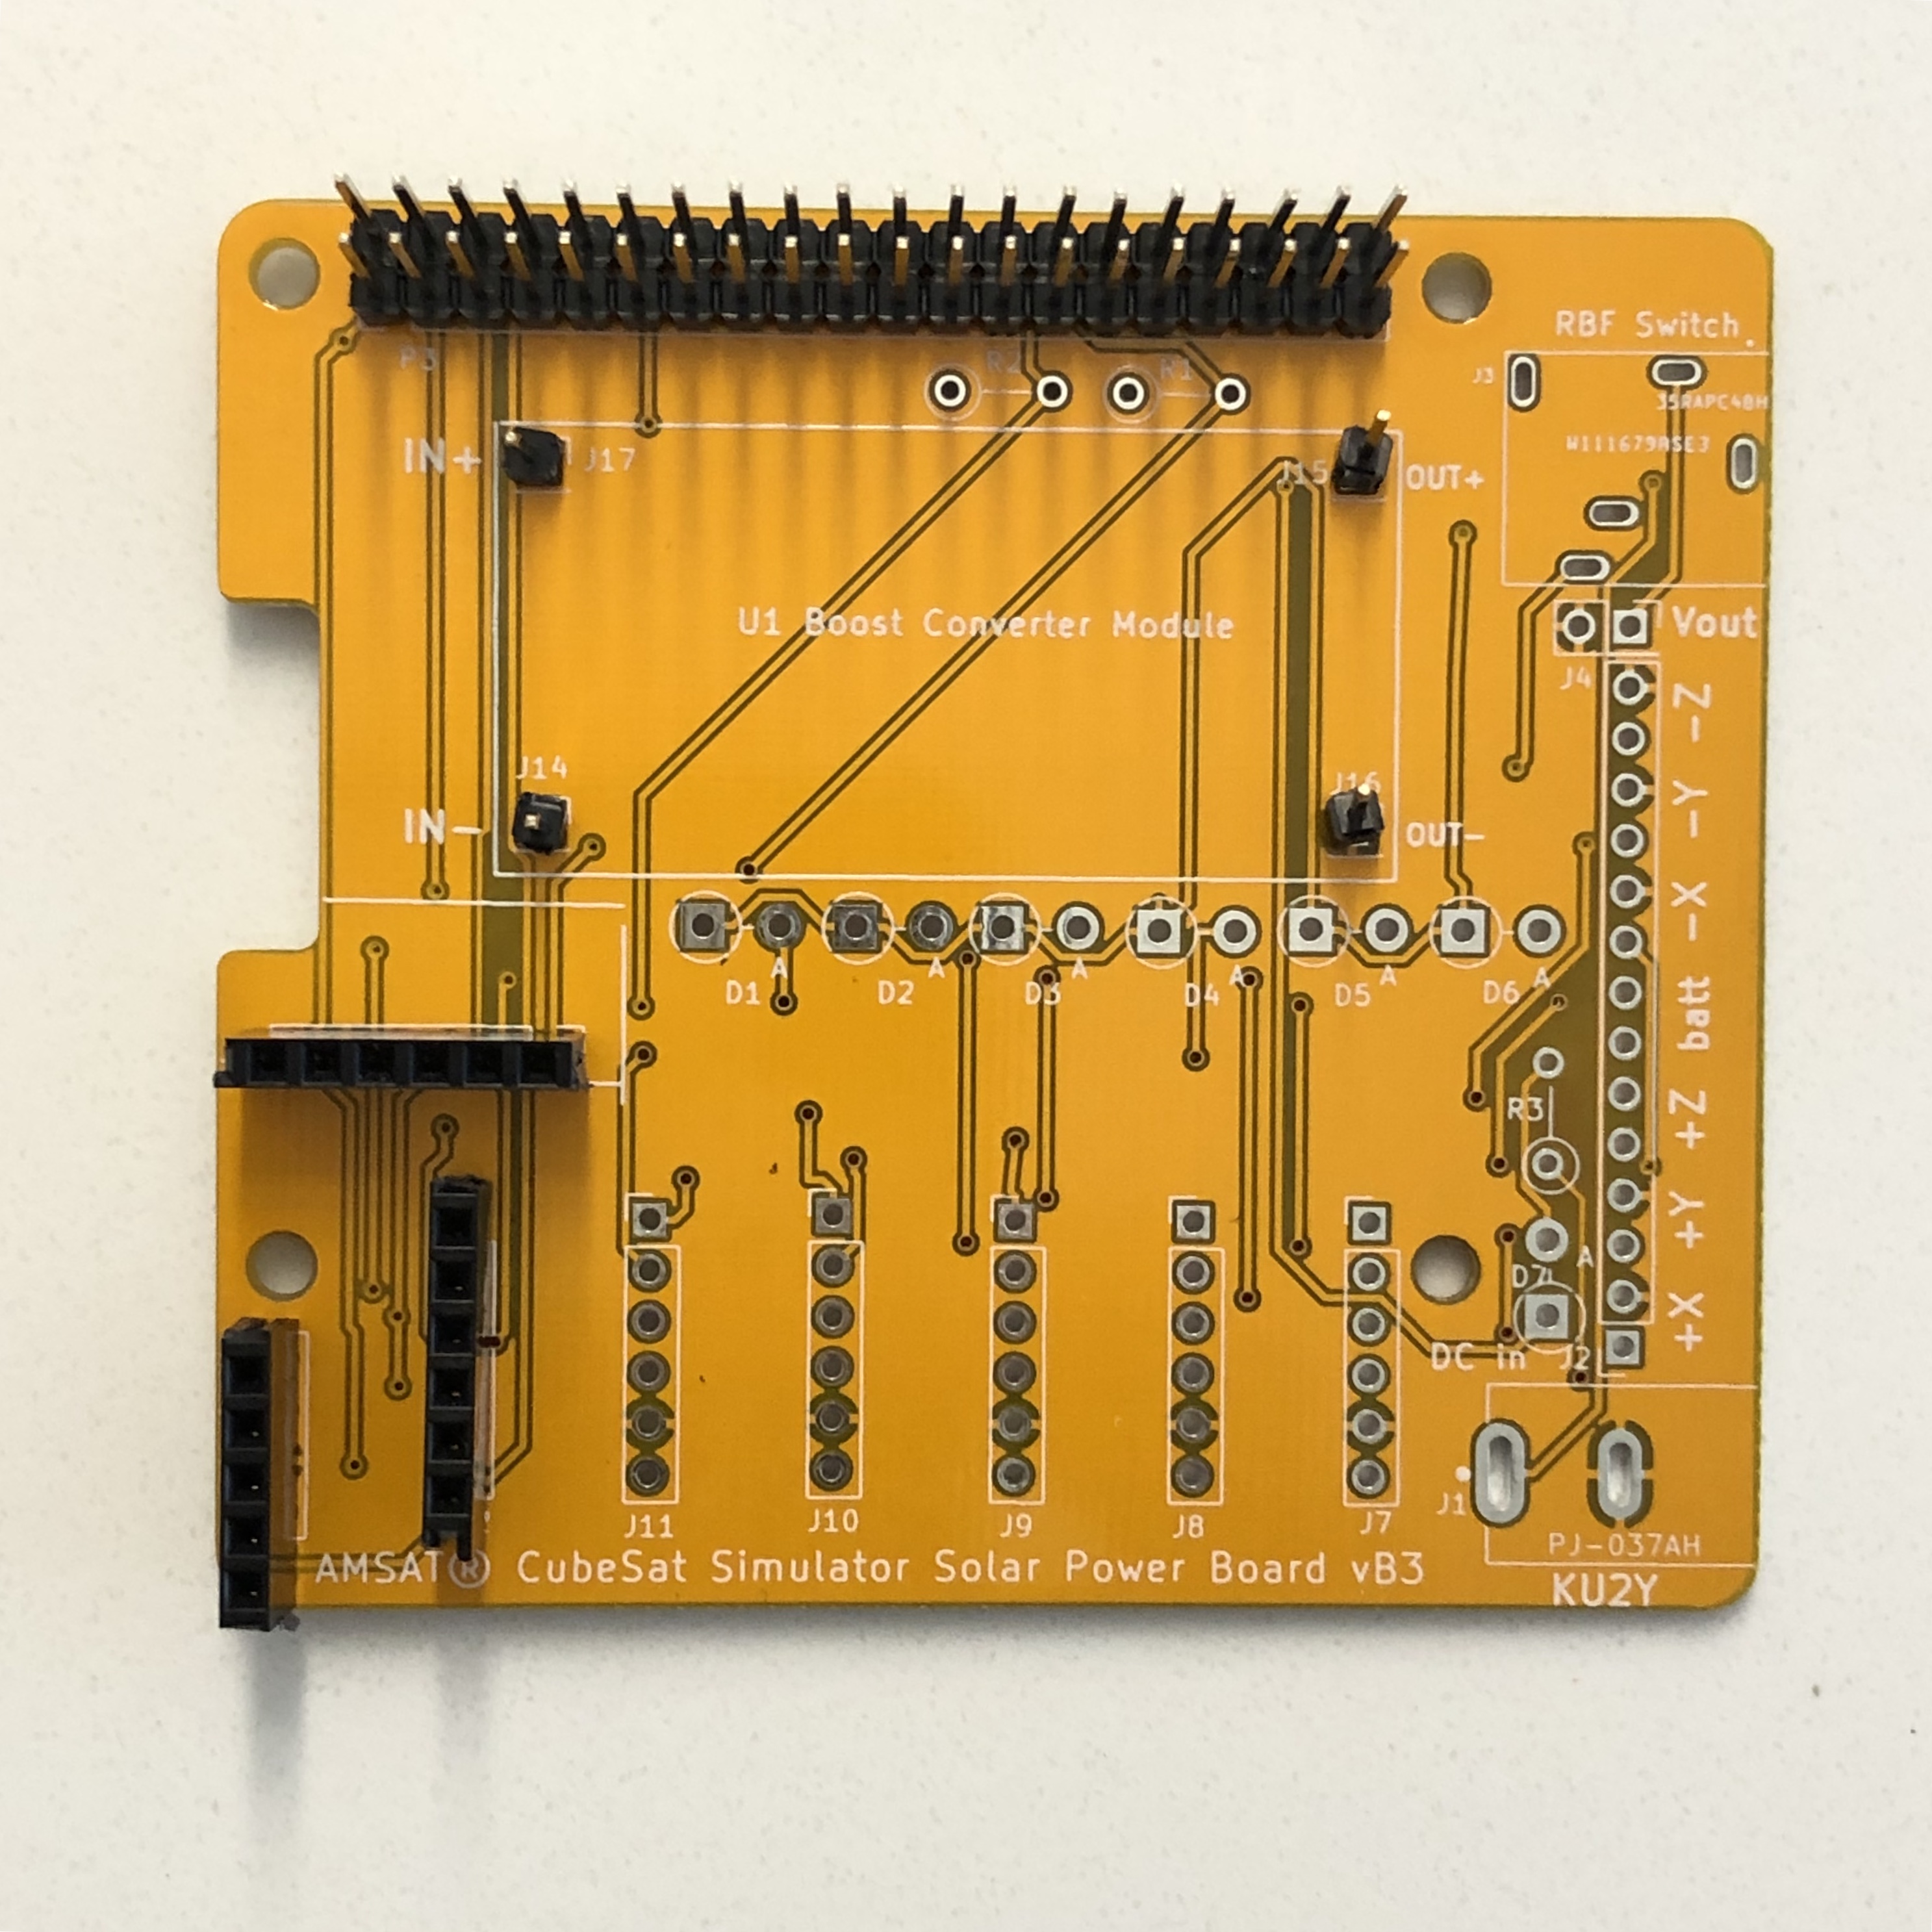 PCB with J1 - J5 installed